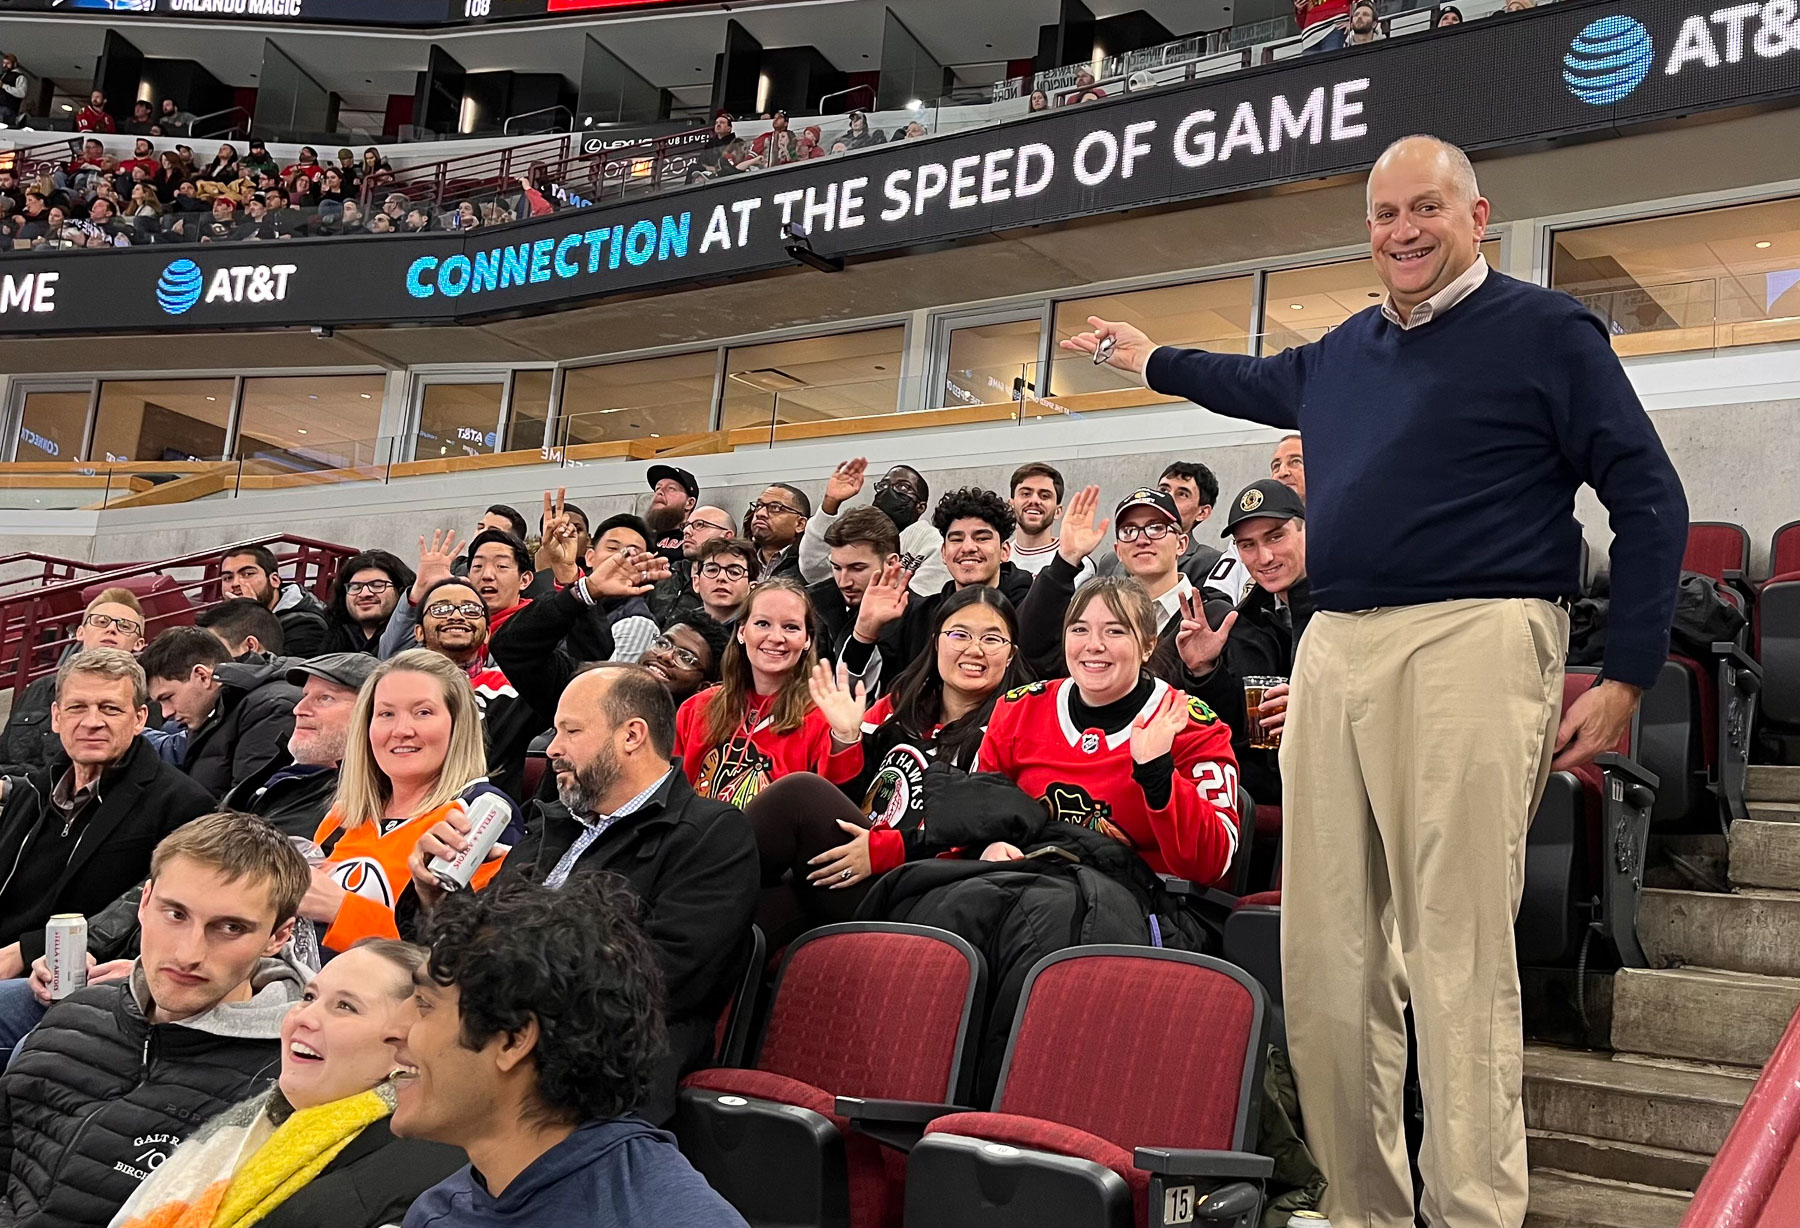 The class were special guests of the Blackhawks that evening for their game vs. the Edmonton Oilers.